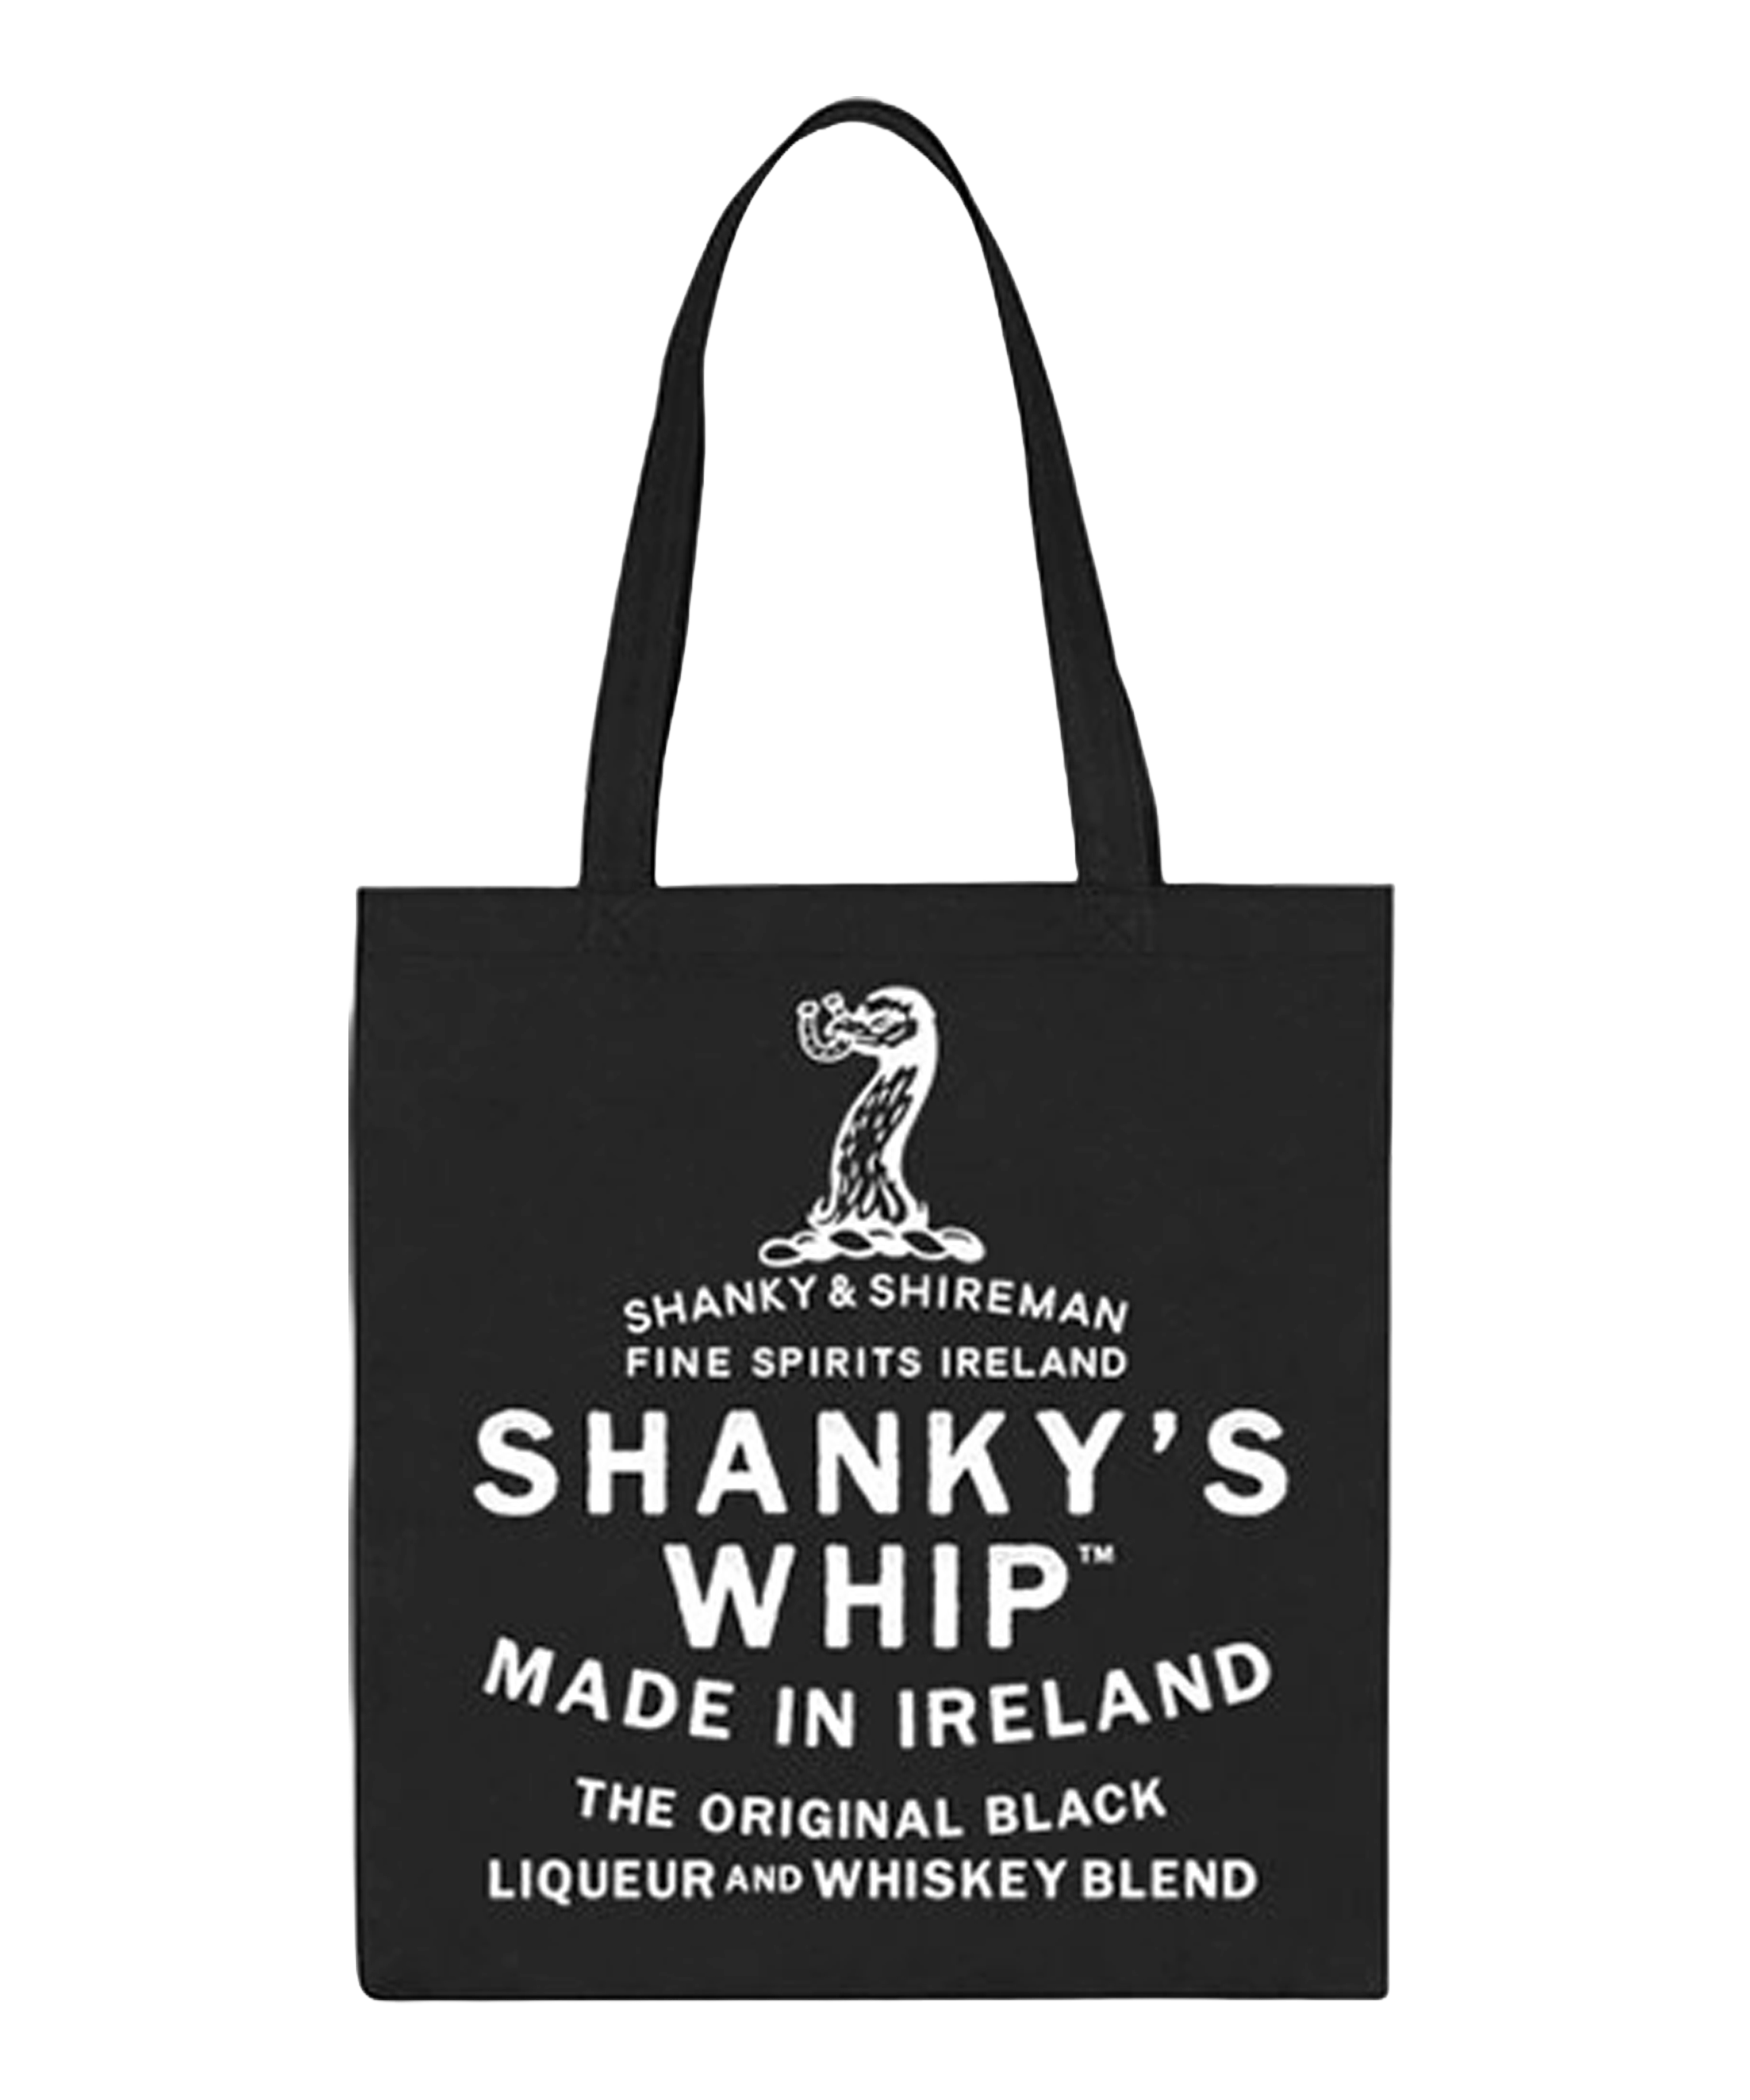 Shanky's Whip Branded Tote Bag